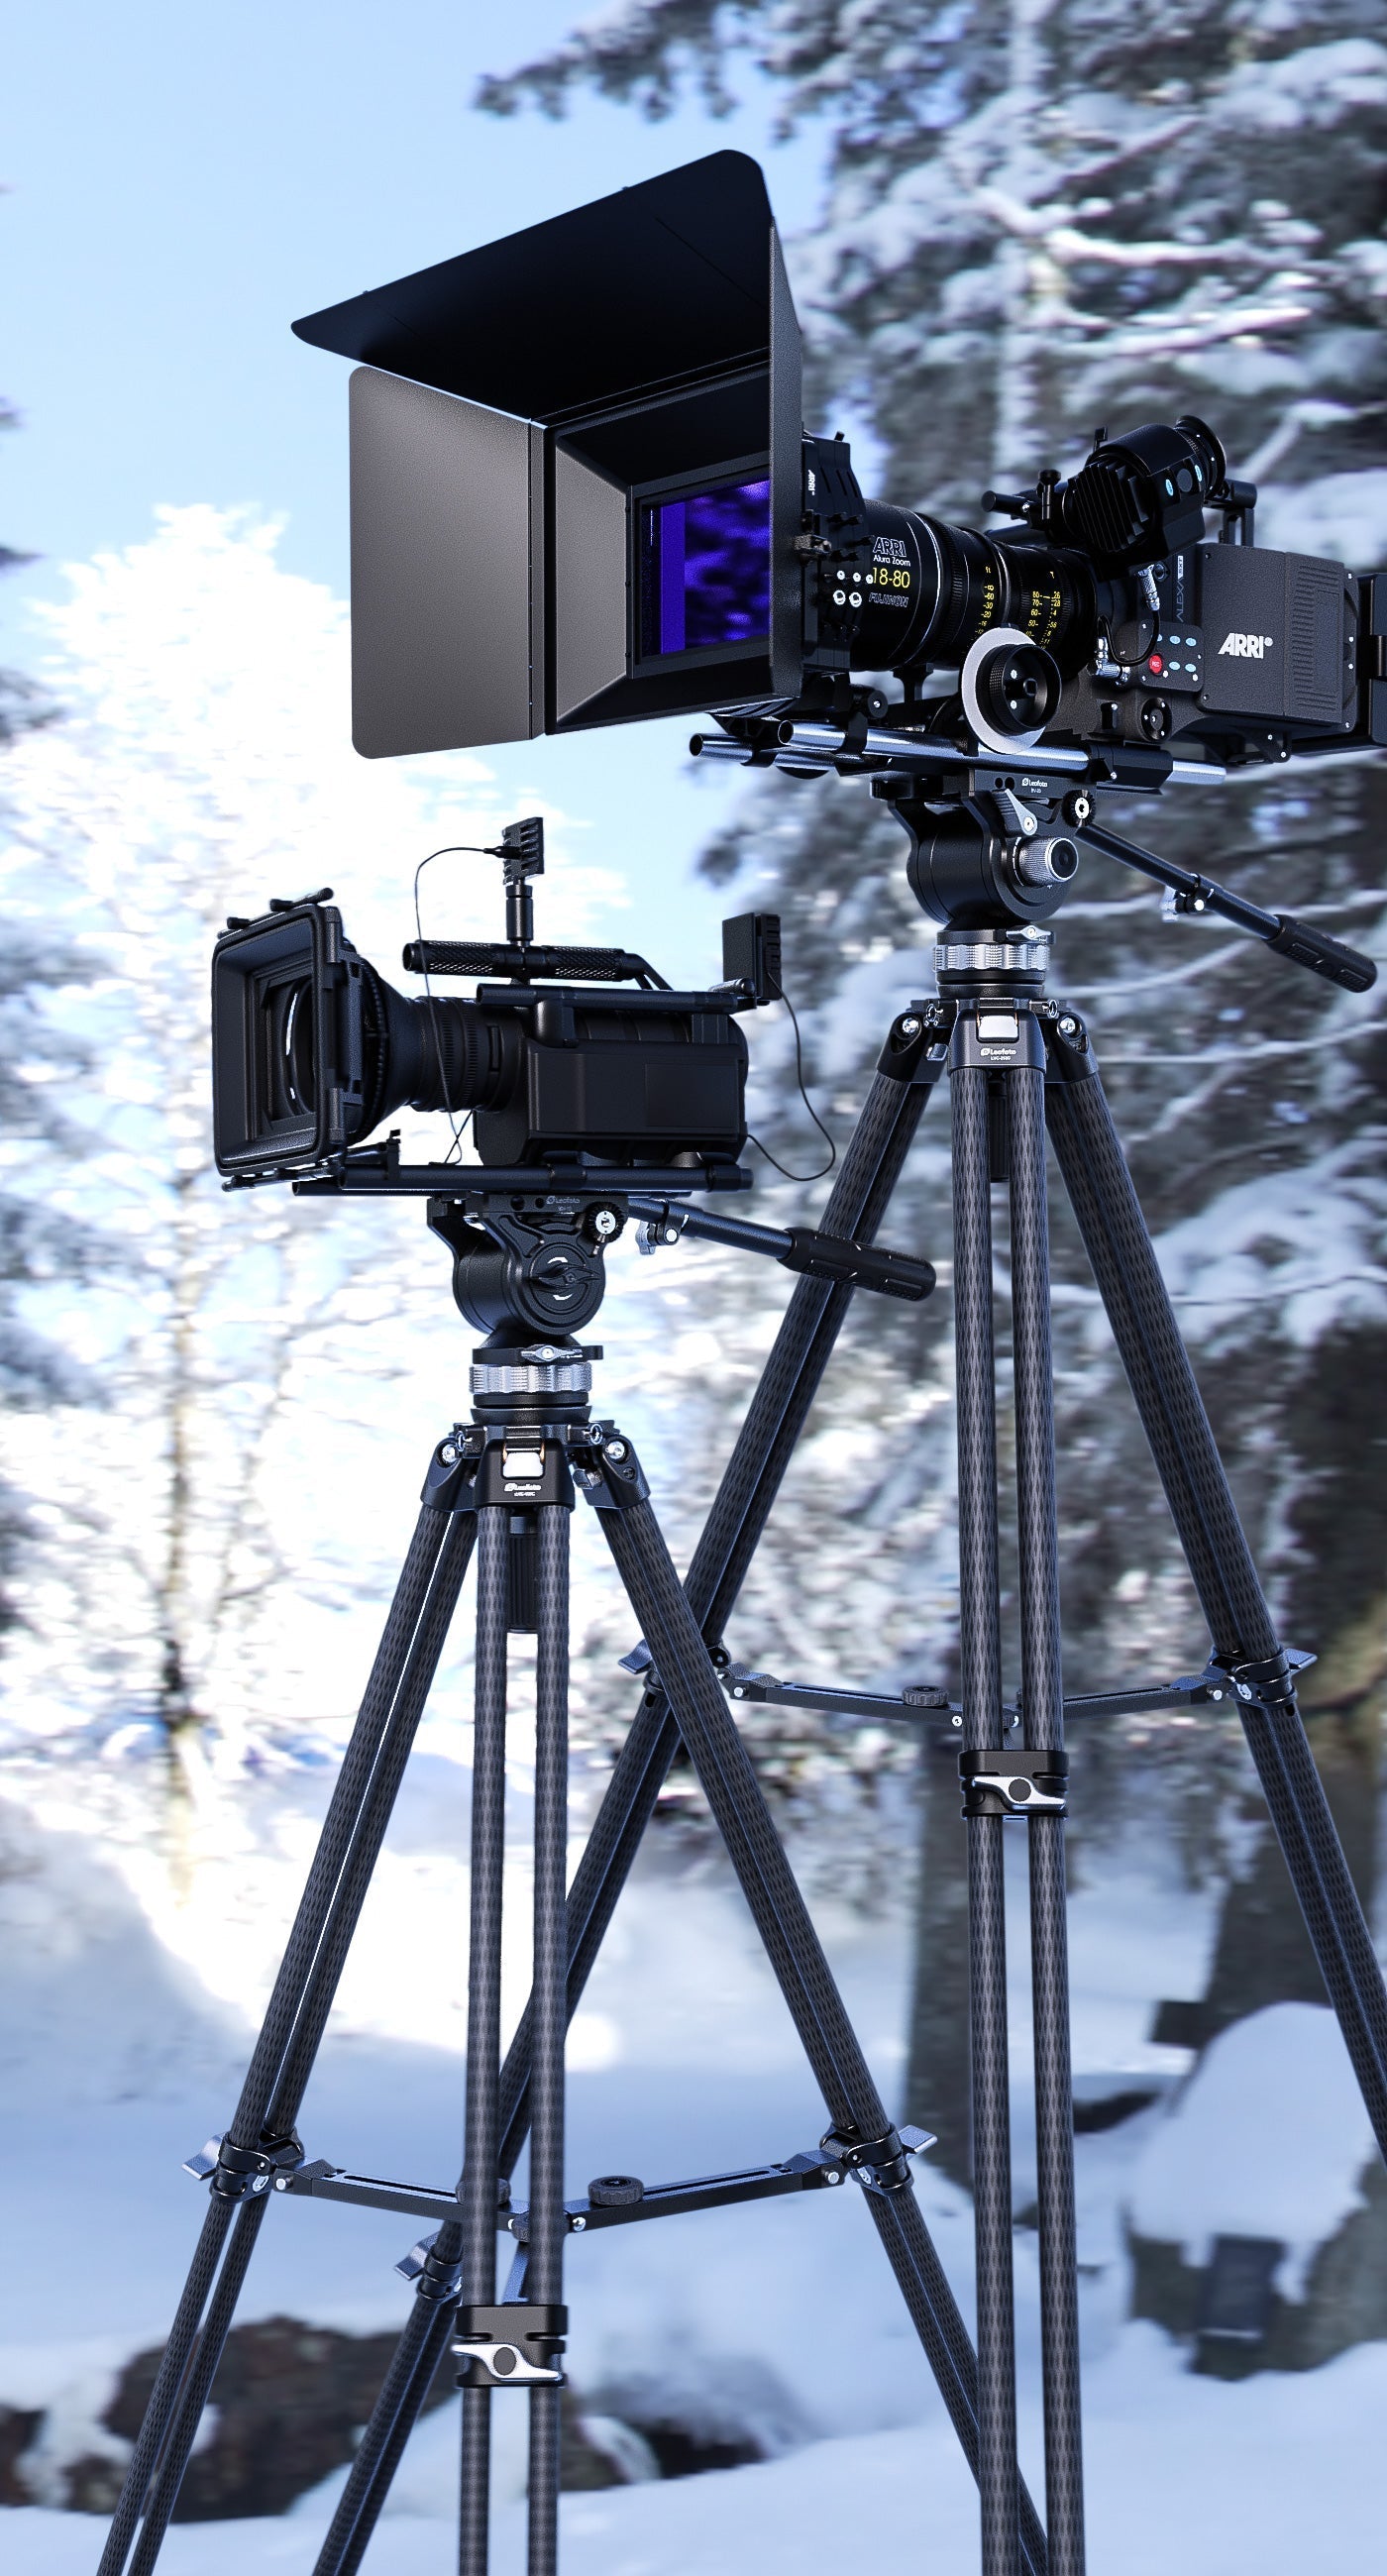 "Open Box" Leofoto LVC-253C Dual-Tube Video Tripod | 75mm Integrated Bowl with Leveling Base and Handle (Tripod Only)